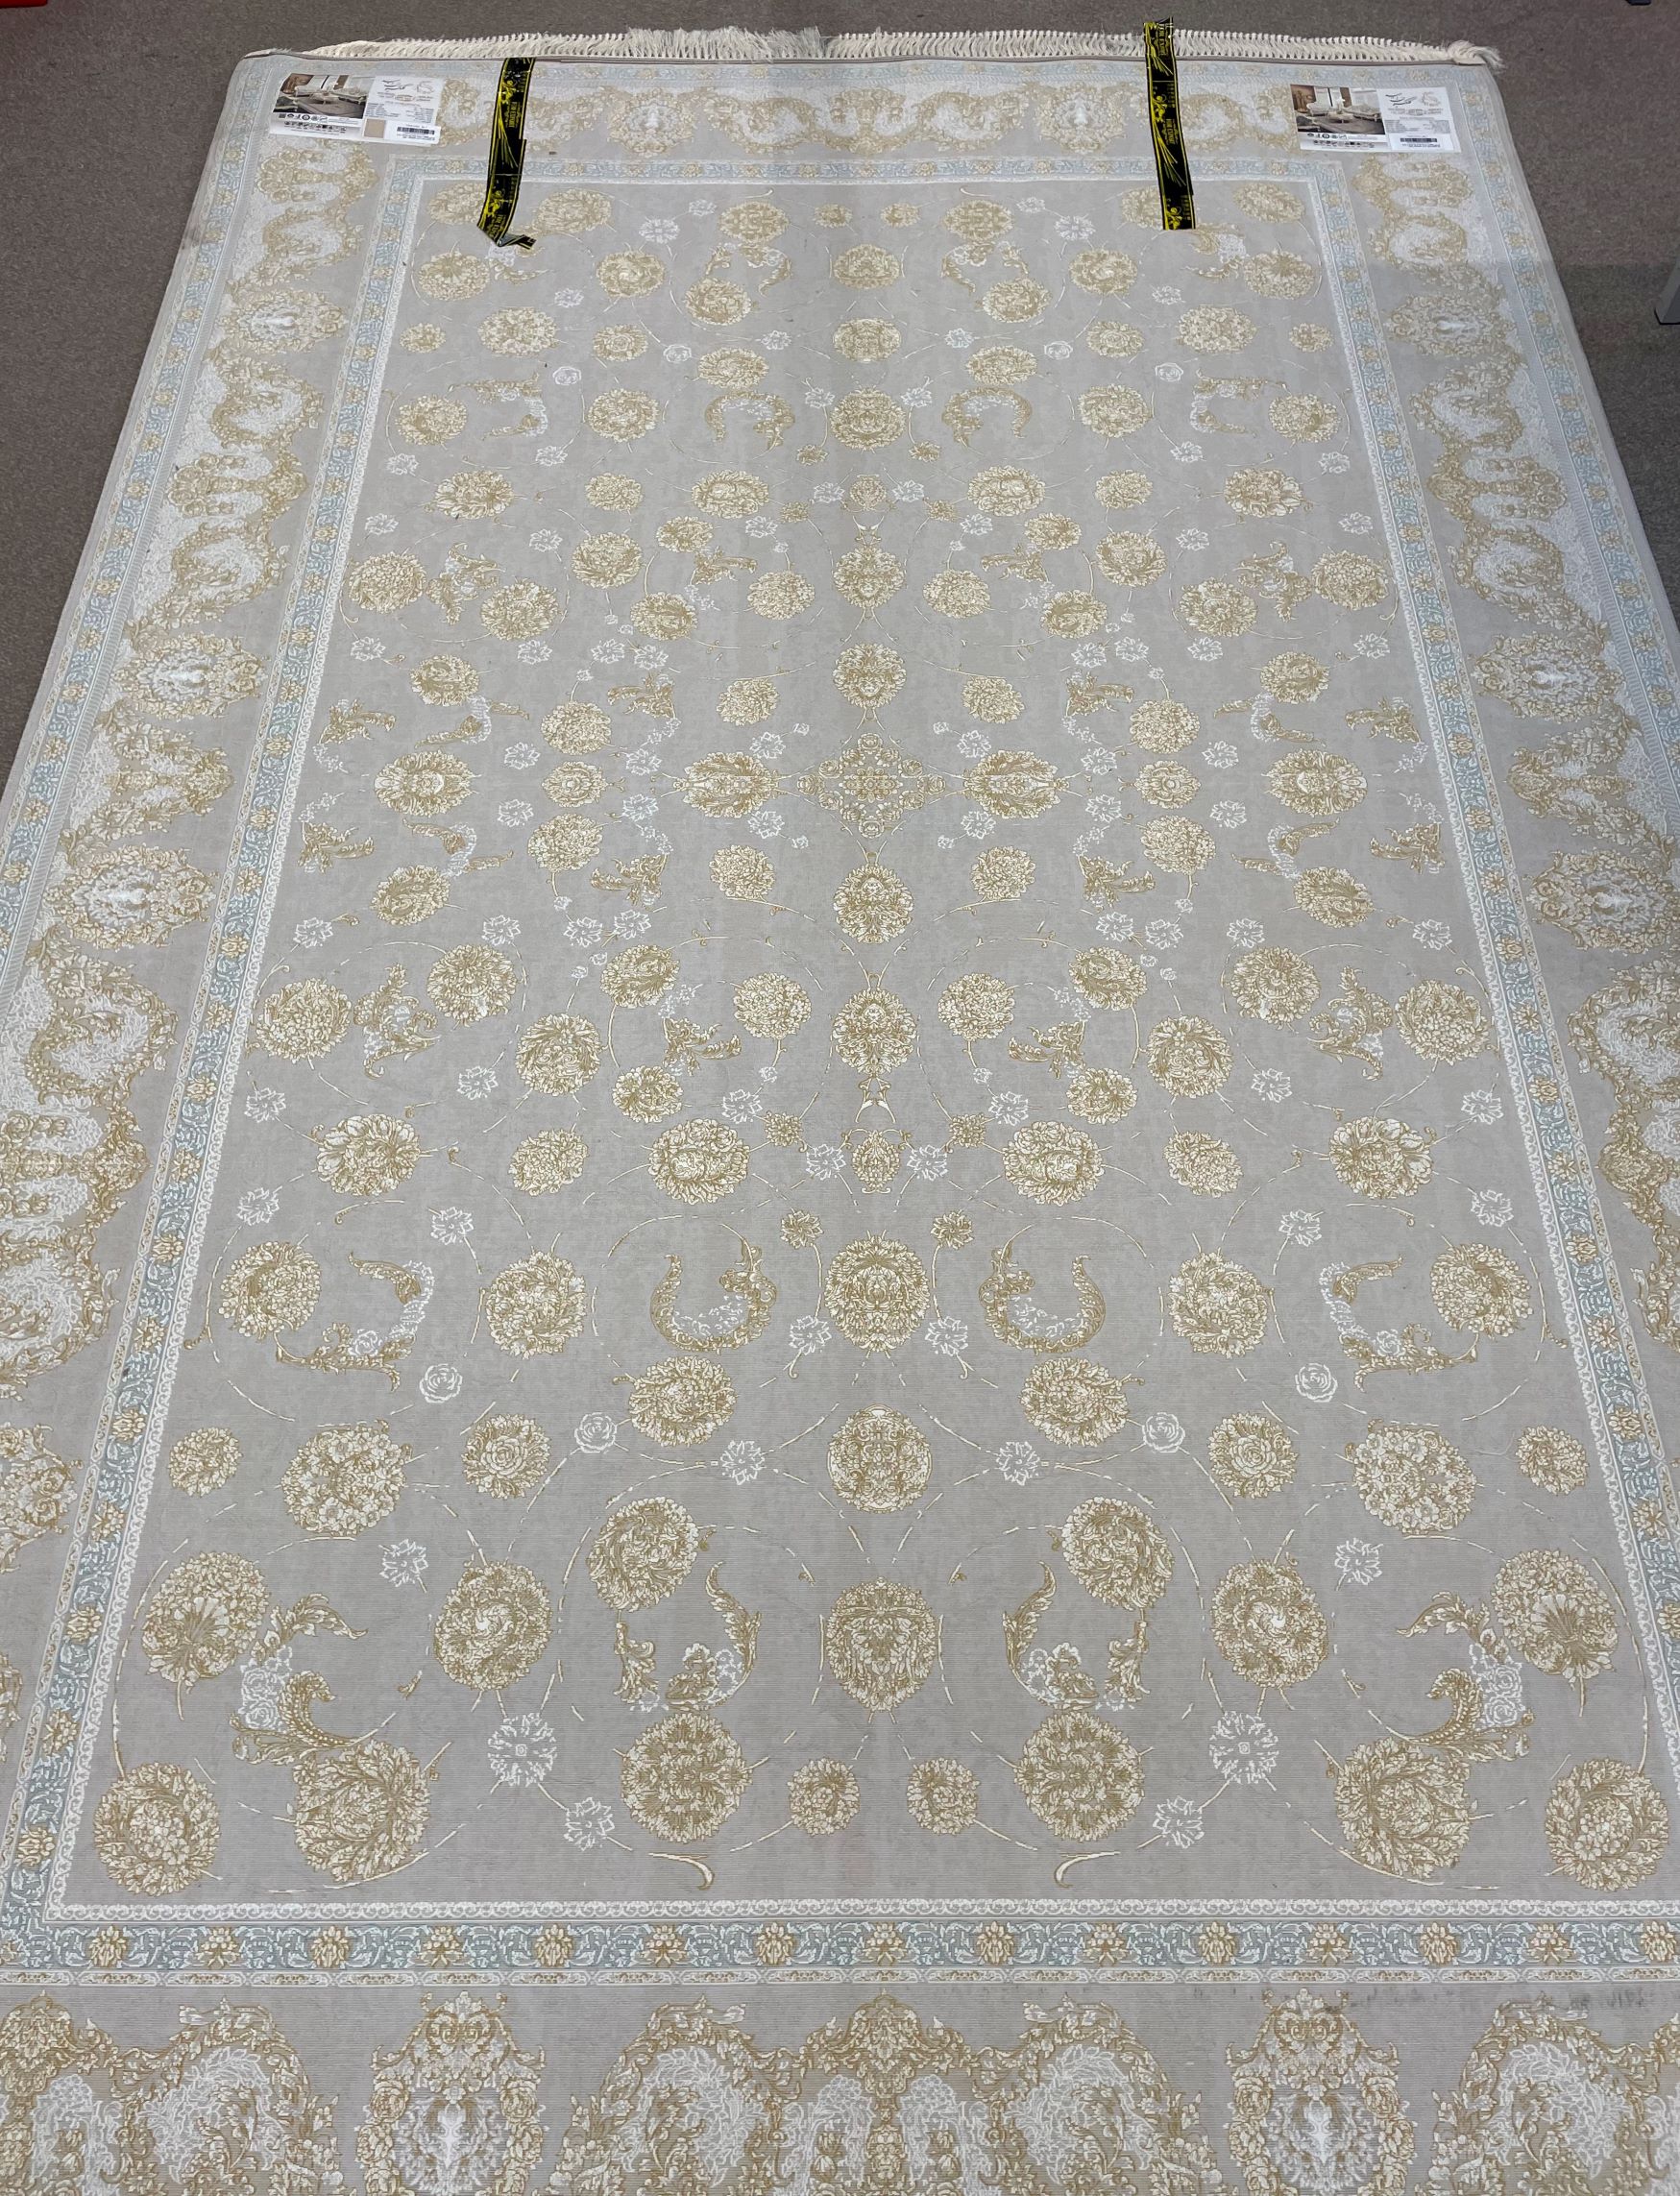 Fine woven Iranian carpet with gold embossed floral pattern 2m by 3m - Image 3 of 4